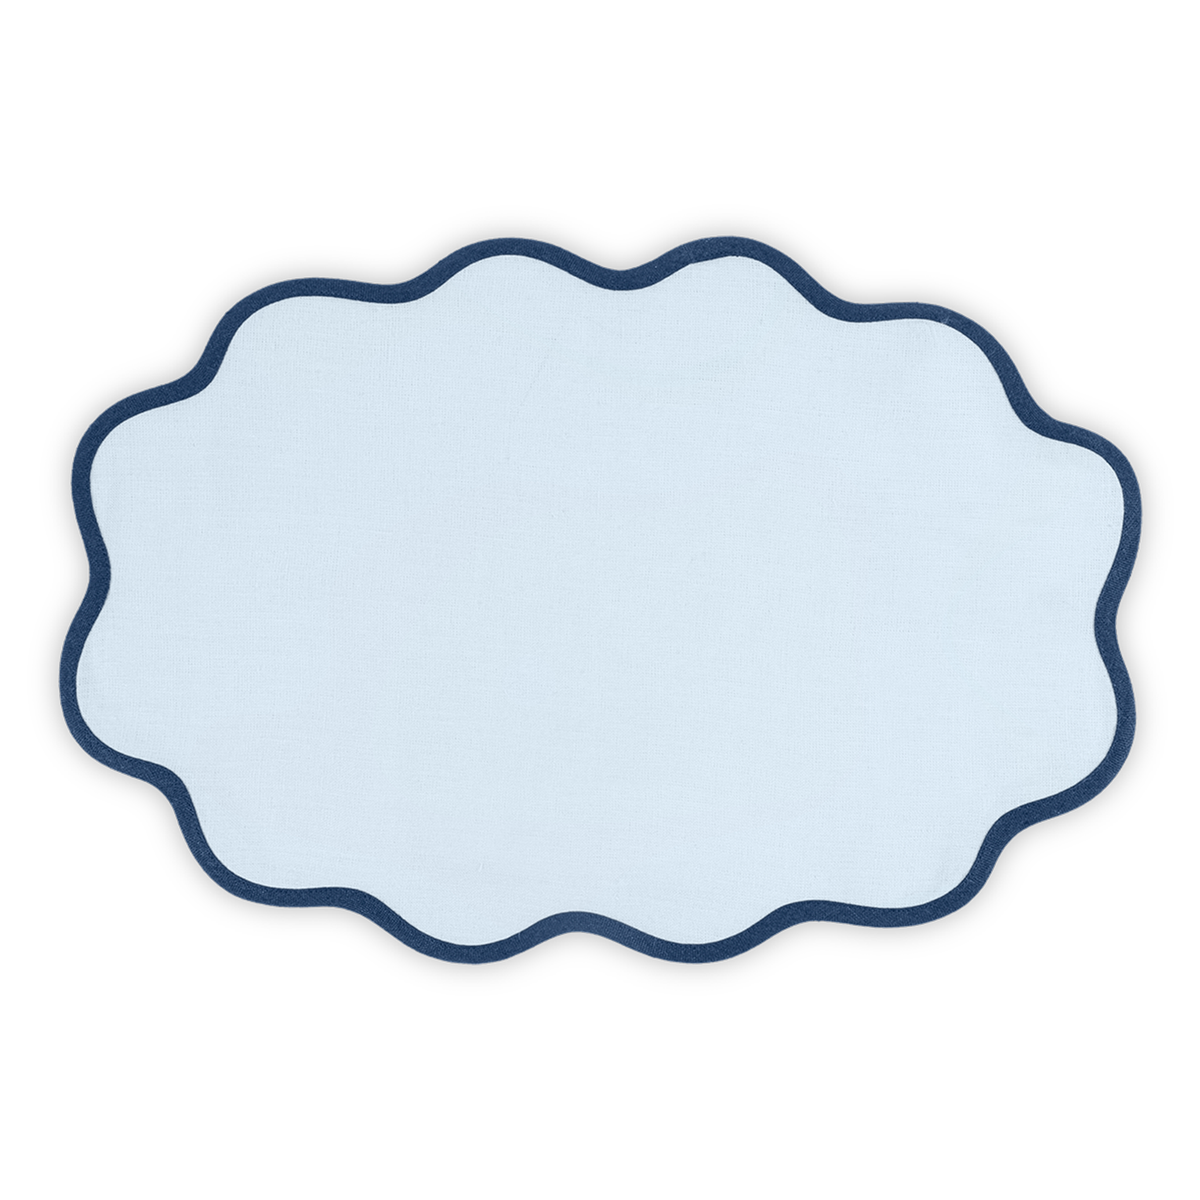 Oval Placemat of Matouk Scallop Edge Table Linens in Color Ice Blue/Navy